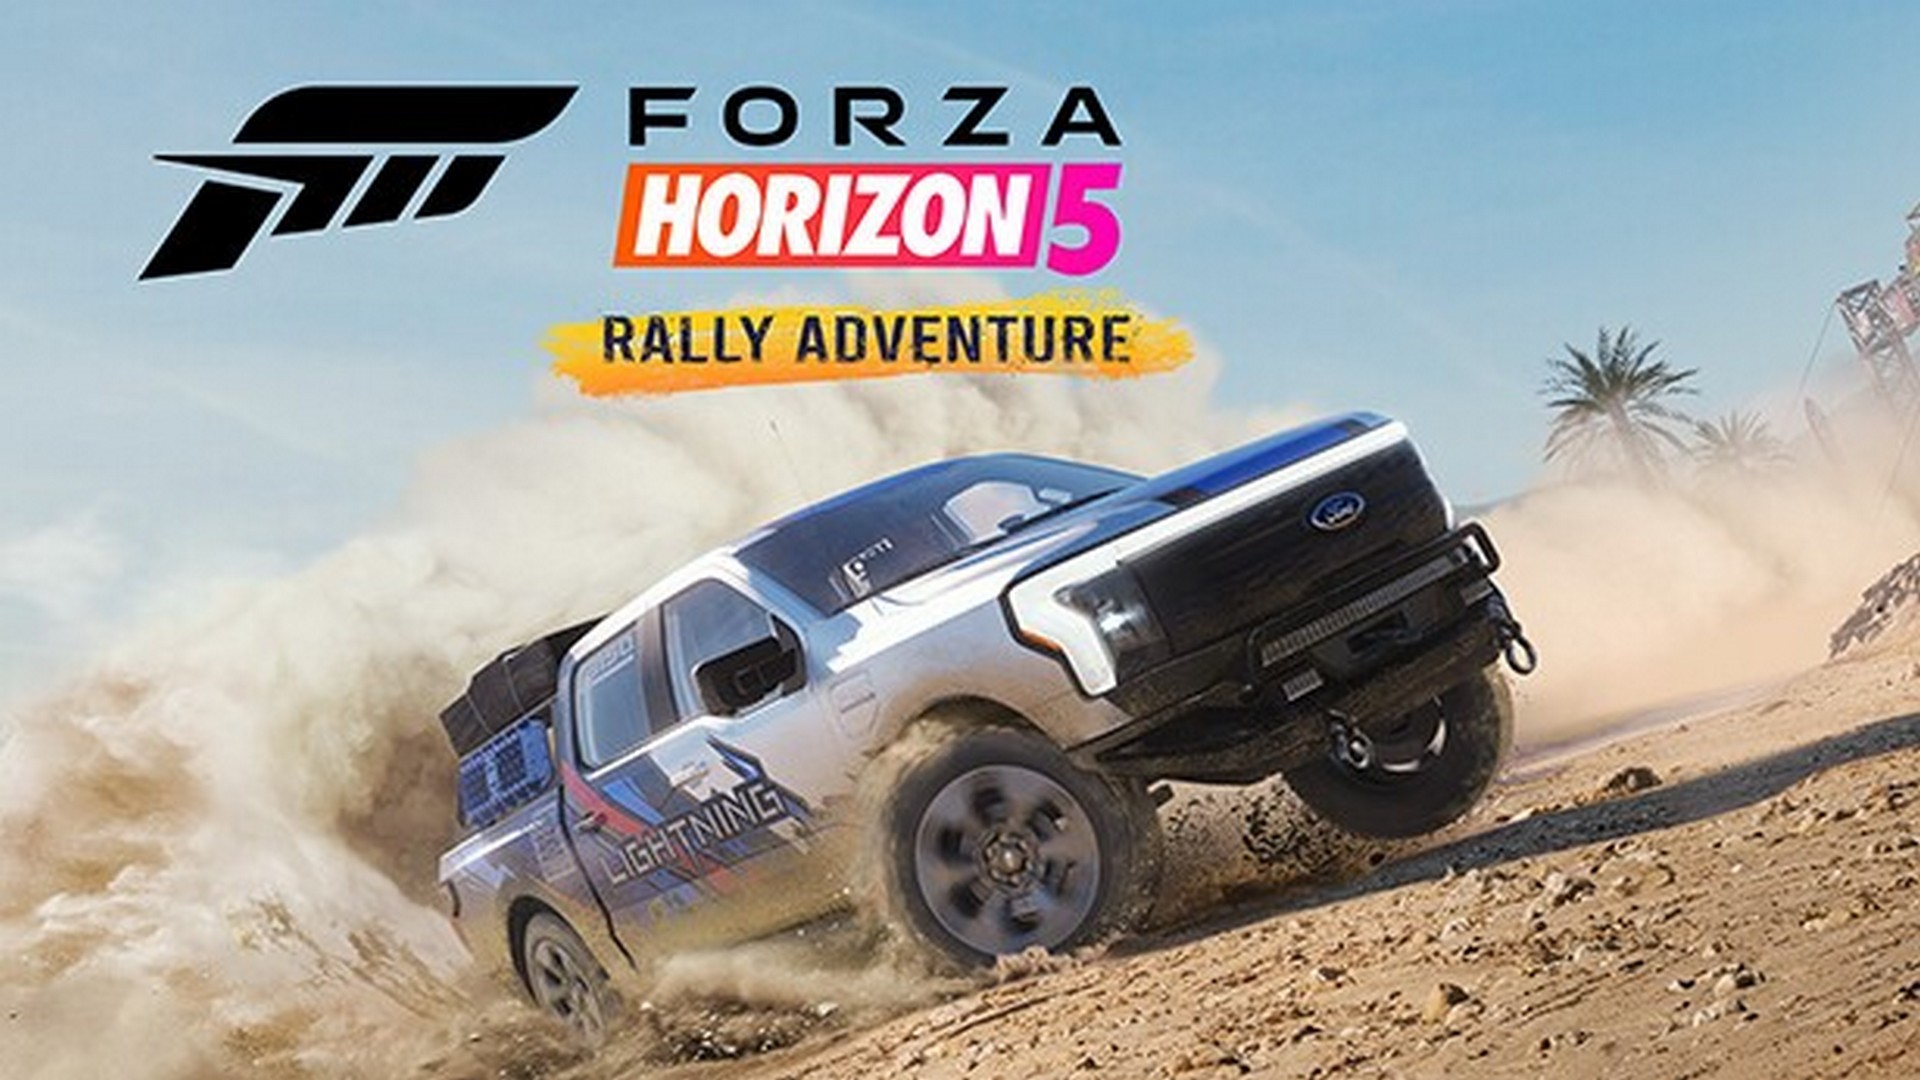 Forza Horizon 5 Rally Adventure DLC is Now Available